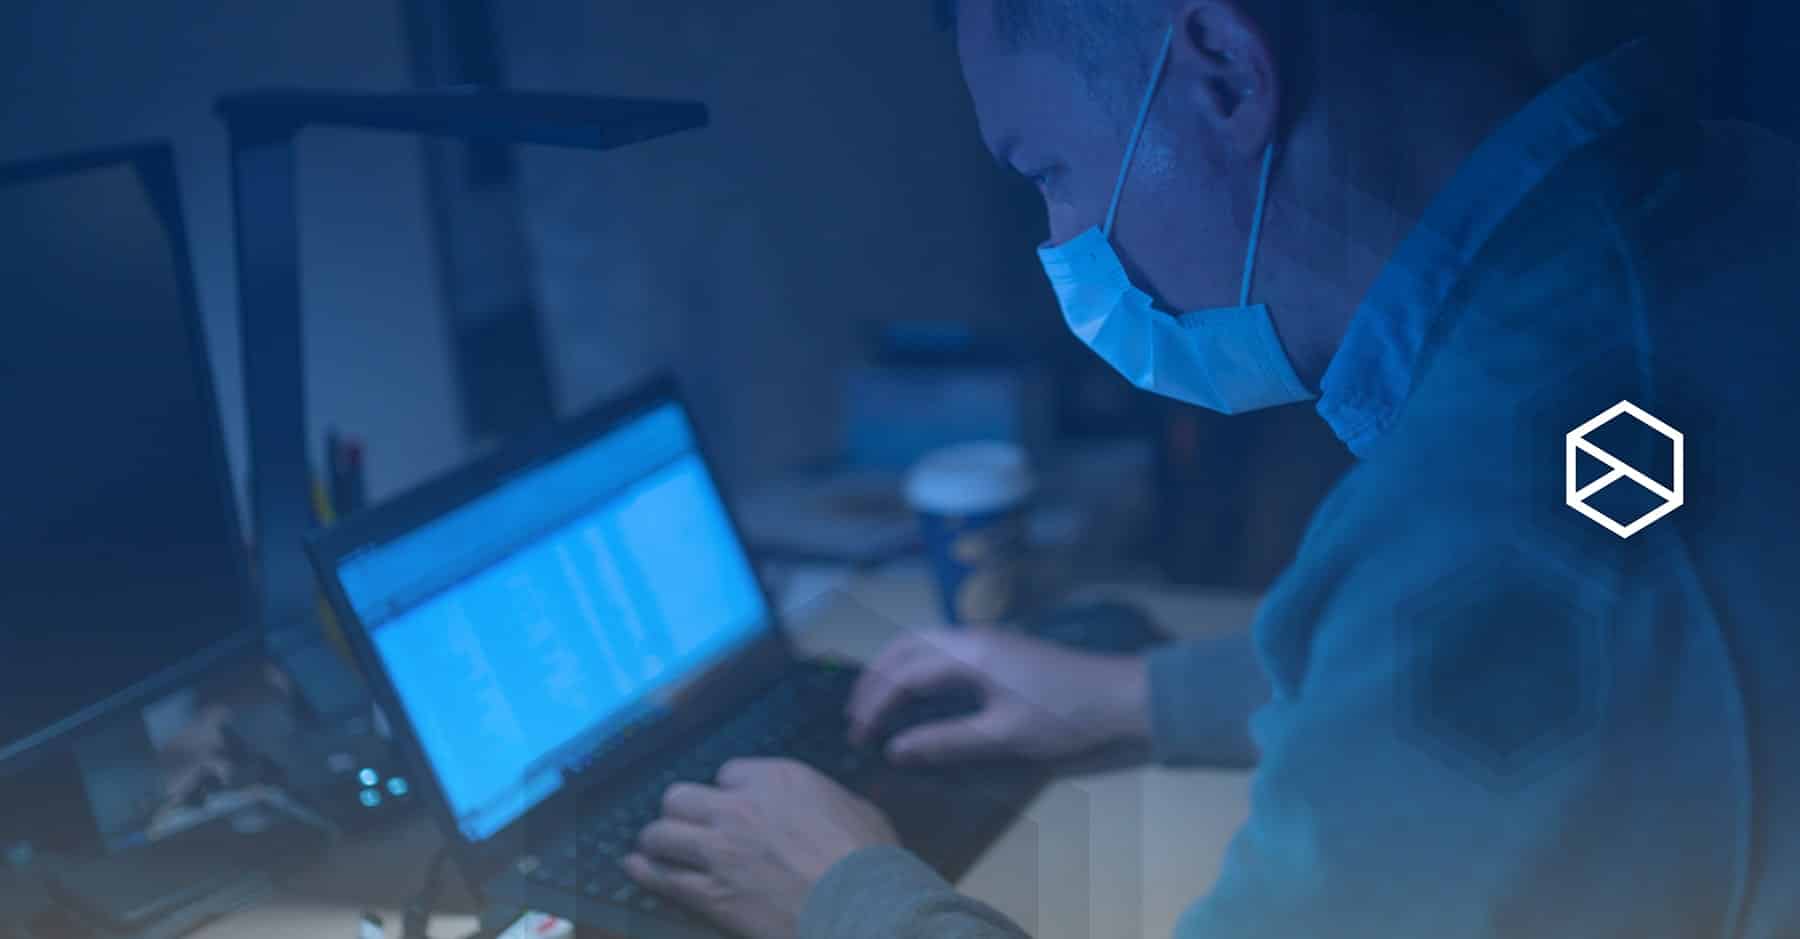 Man working on laptop while wearing surgical face mask